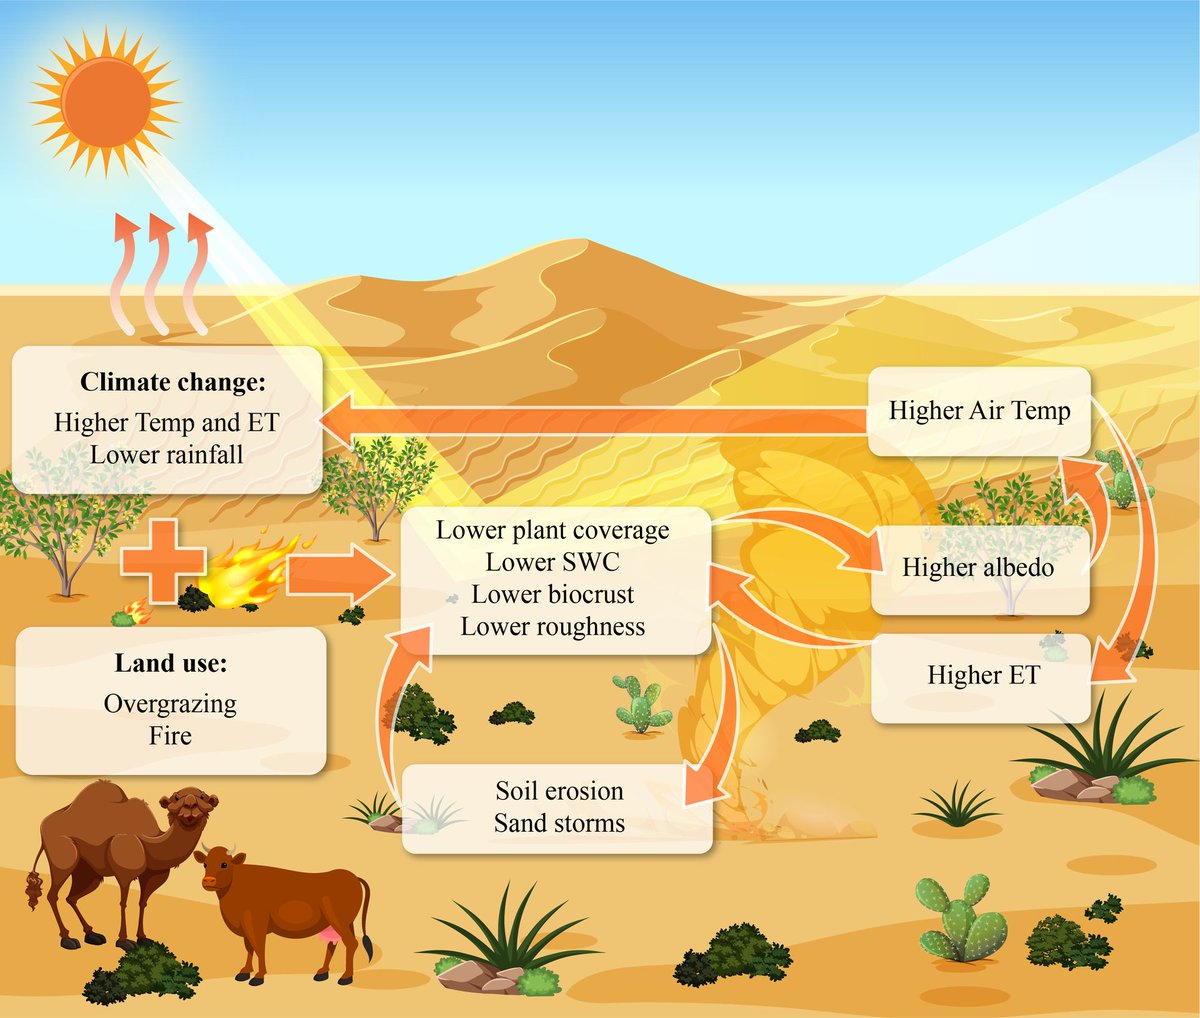 INVITED REVIEW Impact of aridity rise and arid lands expansion on carbon-storing capacity, biodiversity loss, and ecosystem services 📄 onlinelibrary.wiley.com/doi/abs/10.111…